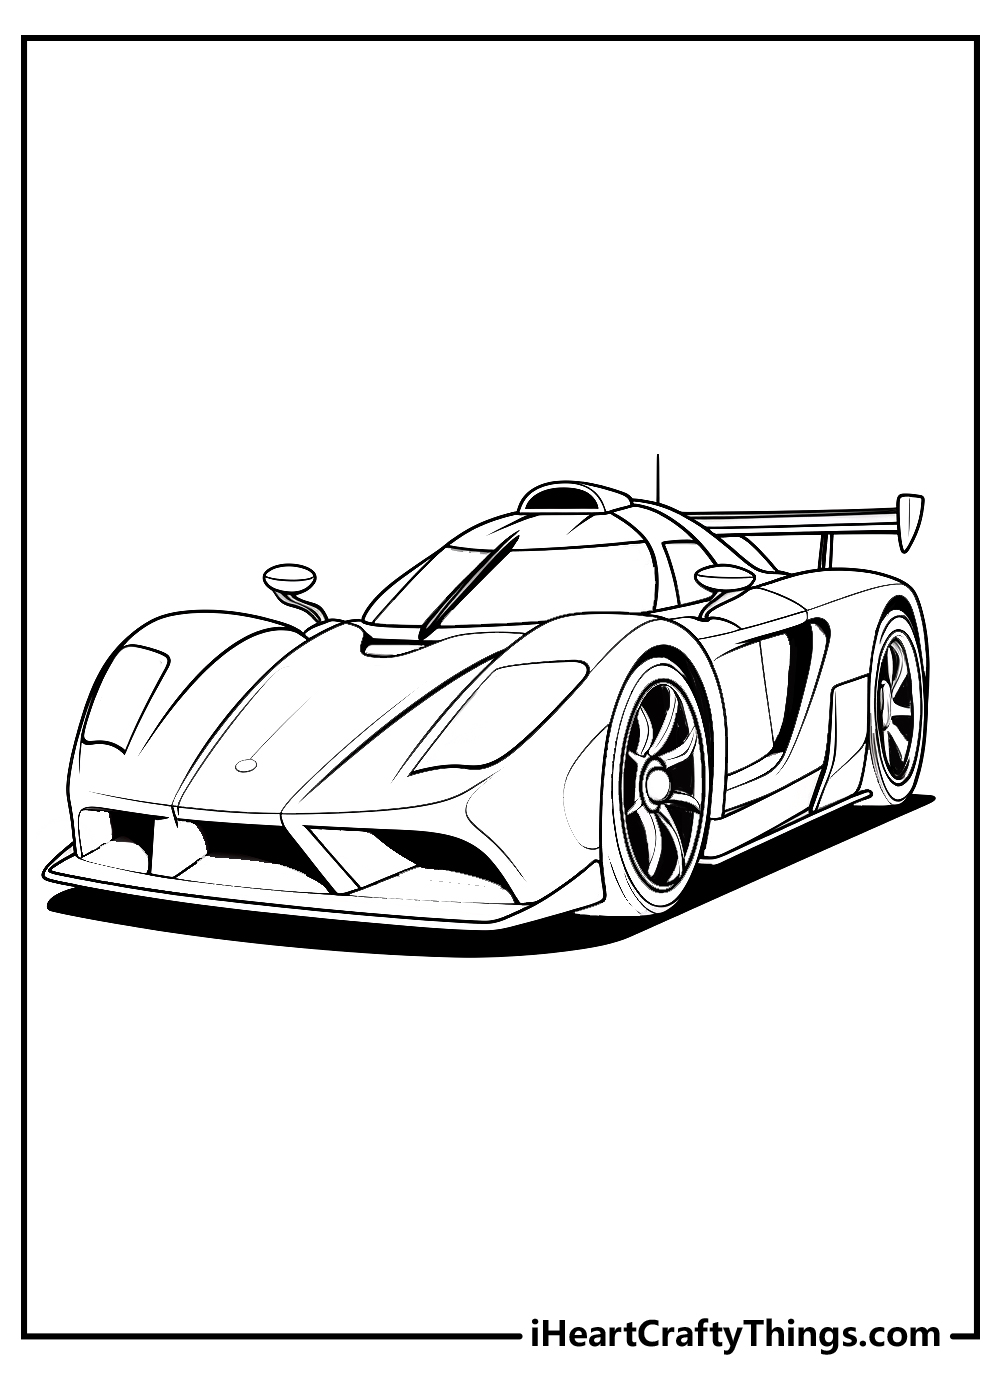 new race car coloring printable